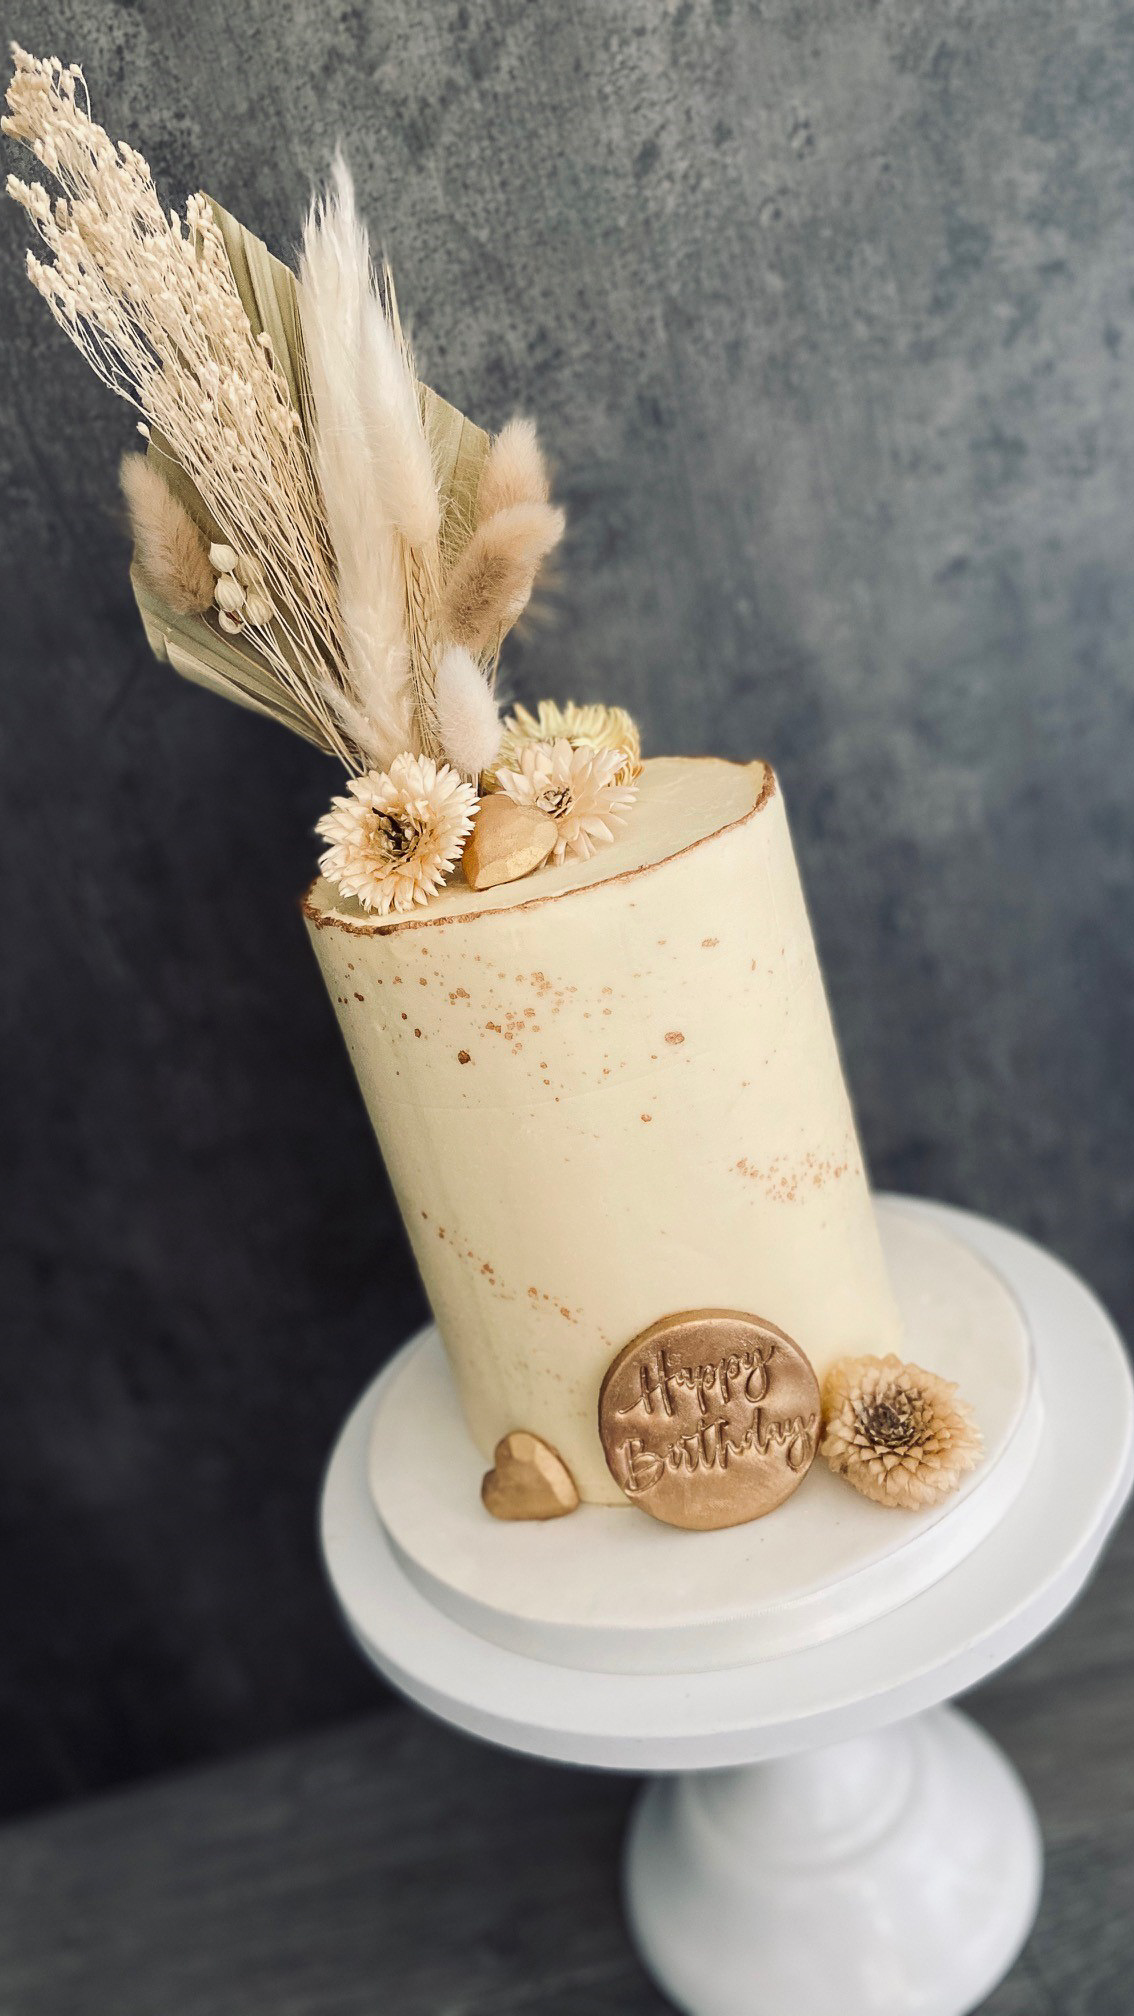 Stylish tall buttercream cake with dried flowers